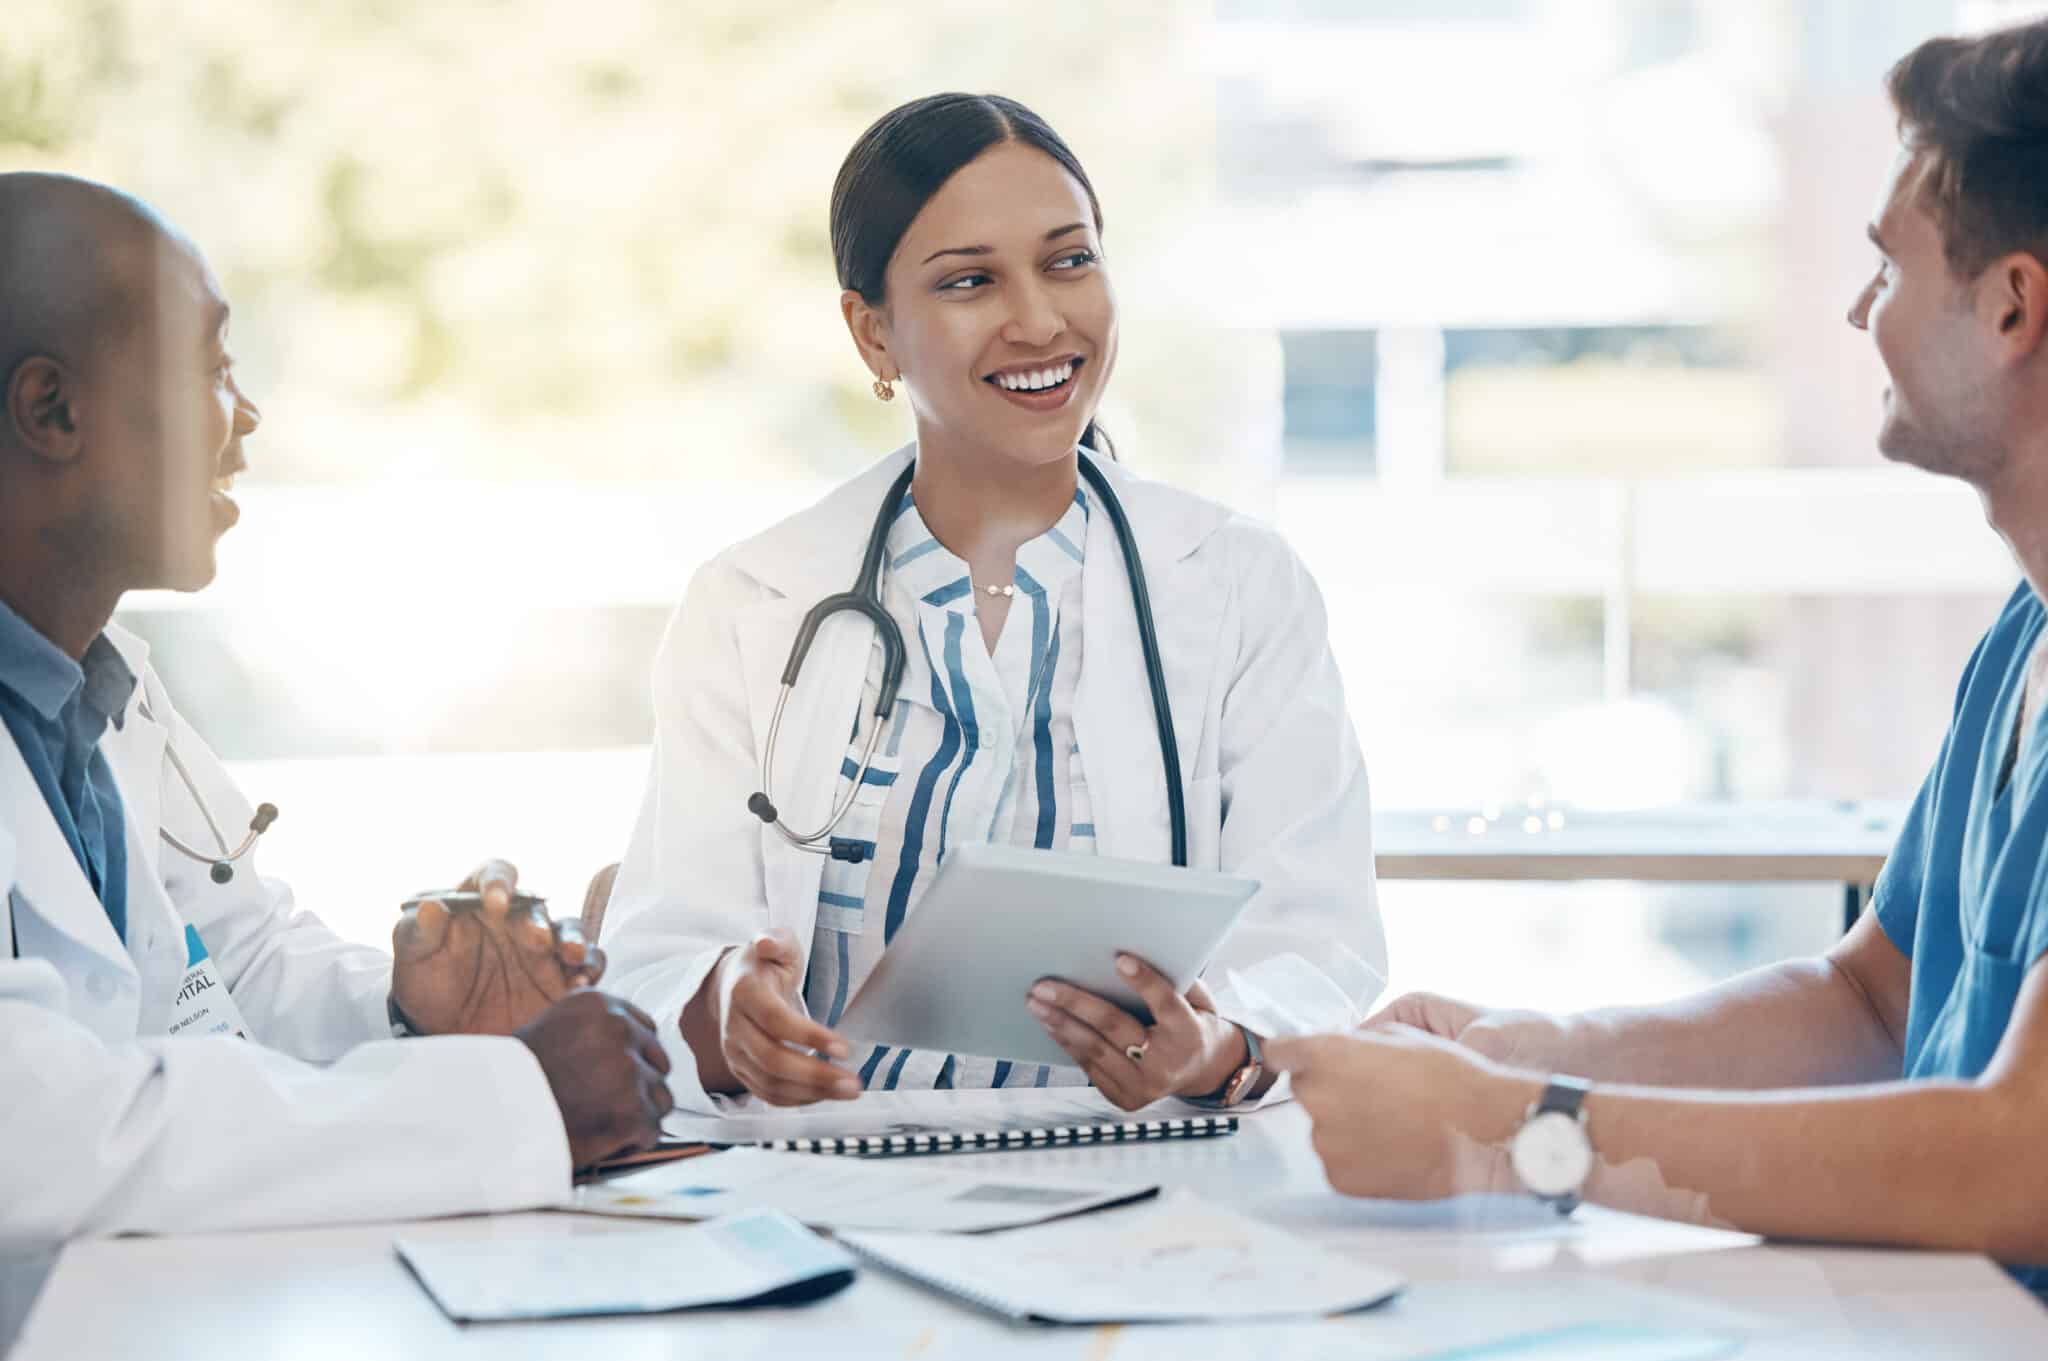 Discover the benefits of medical scribes, including improved practice efficiency and greater revenue. AxiScribe can help your practice boost revenue by 20%!